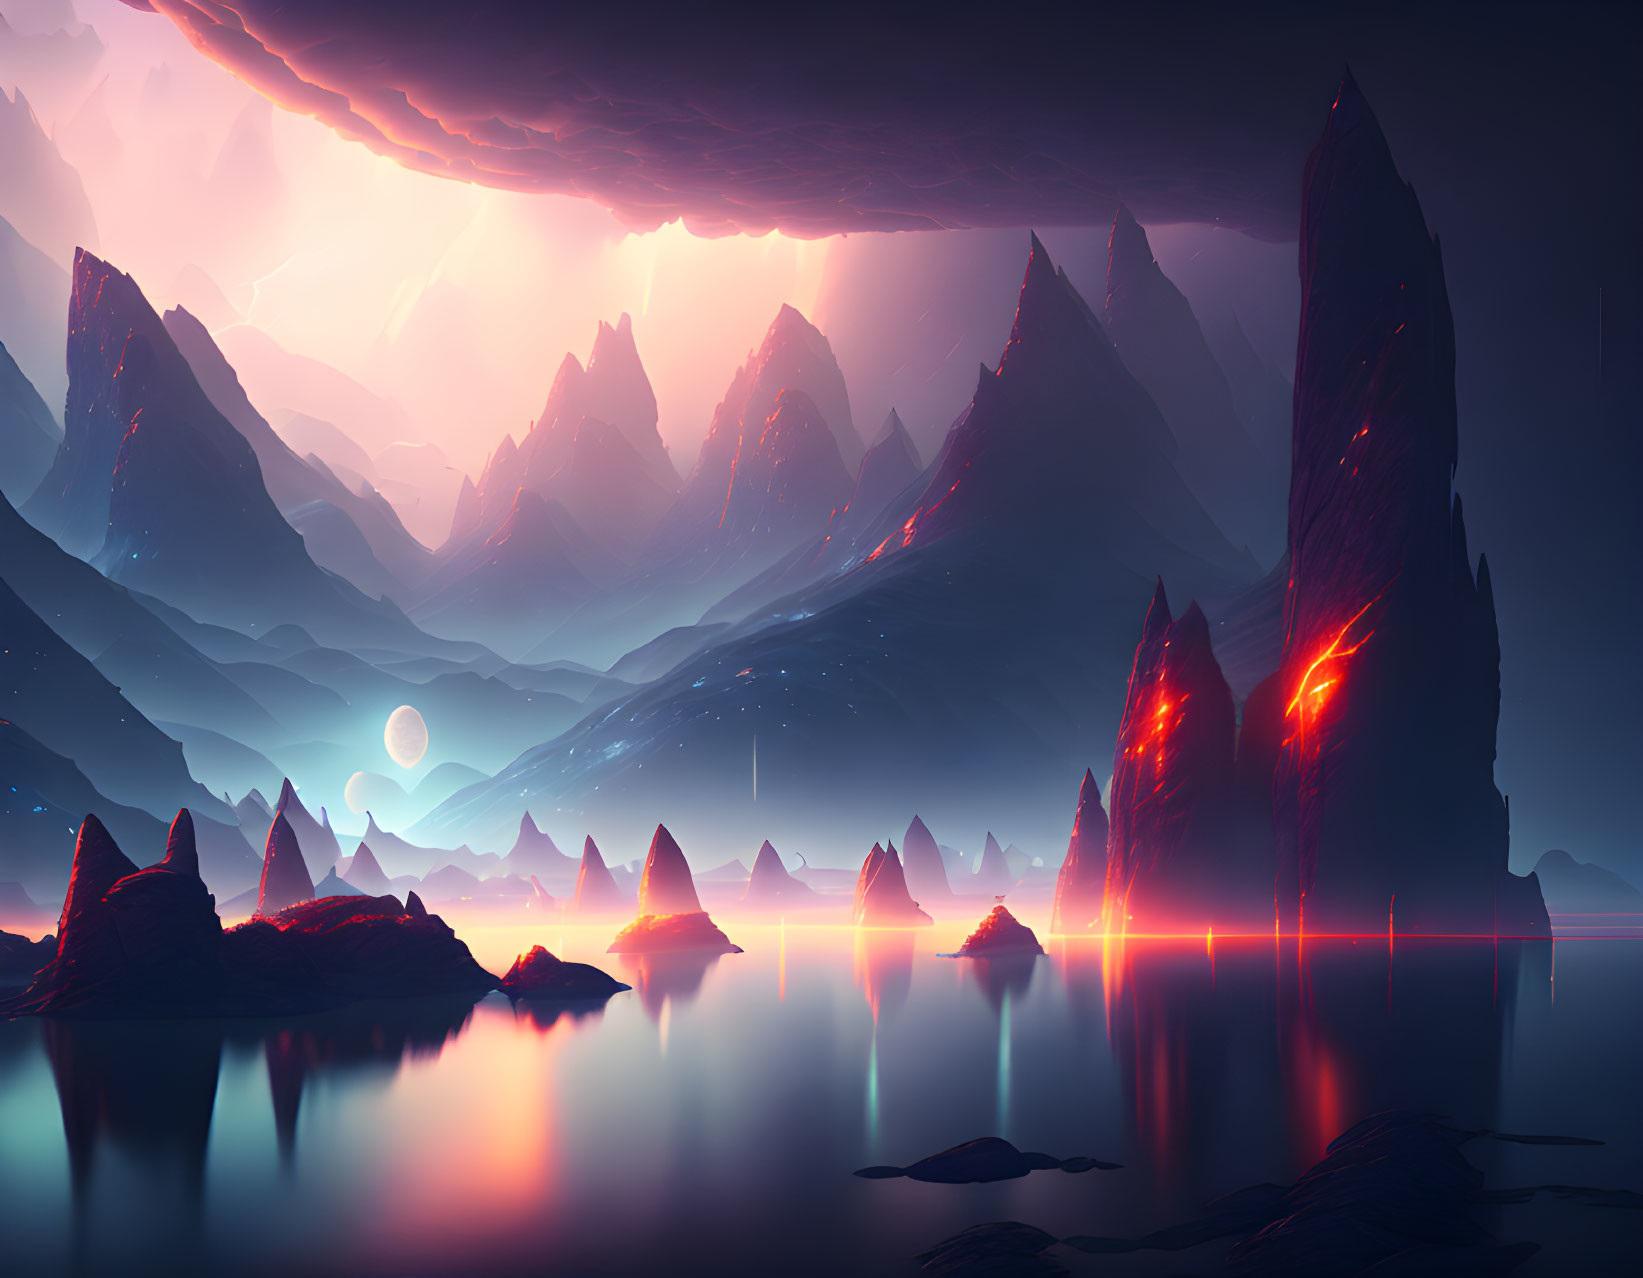 Surreal landscape with glowing red fissures in dark mountains under stormy sky